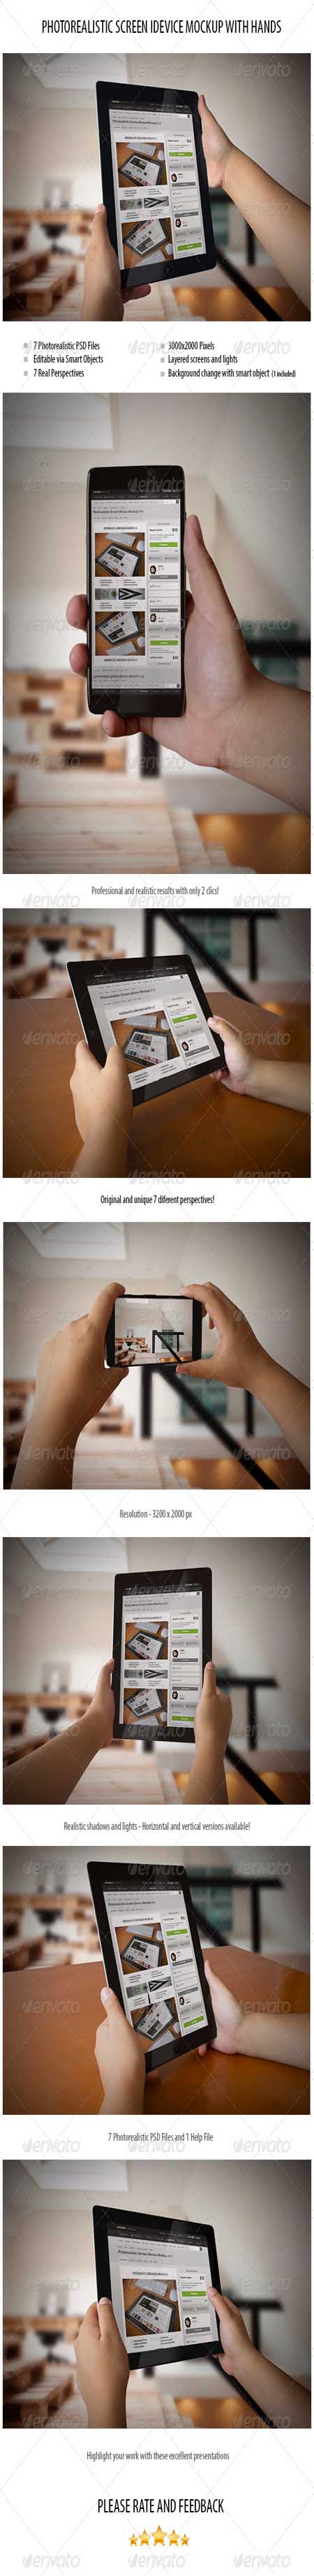 GraphicRiver Photorealistic Screen iDevice Mockup with Hands 6915550